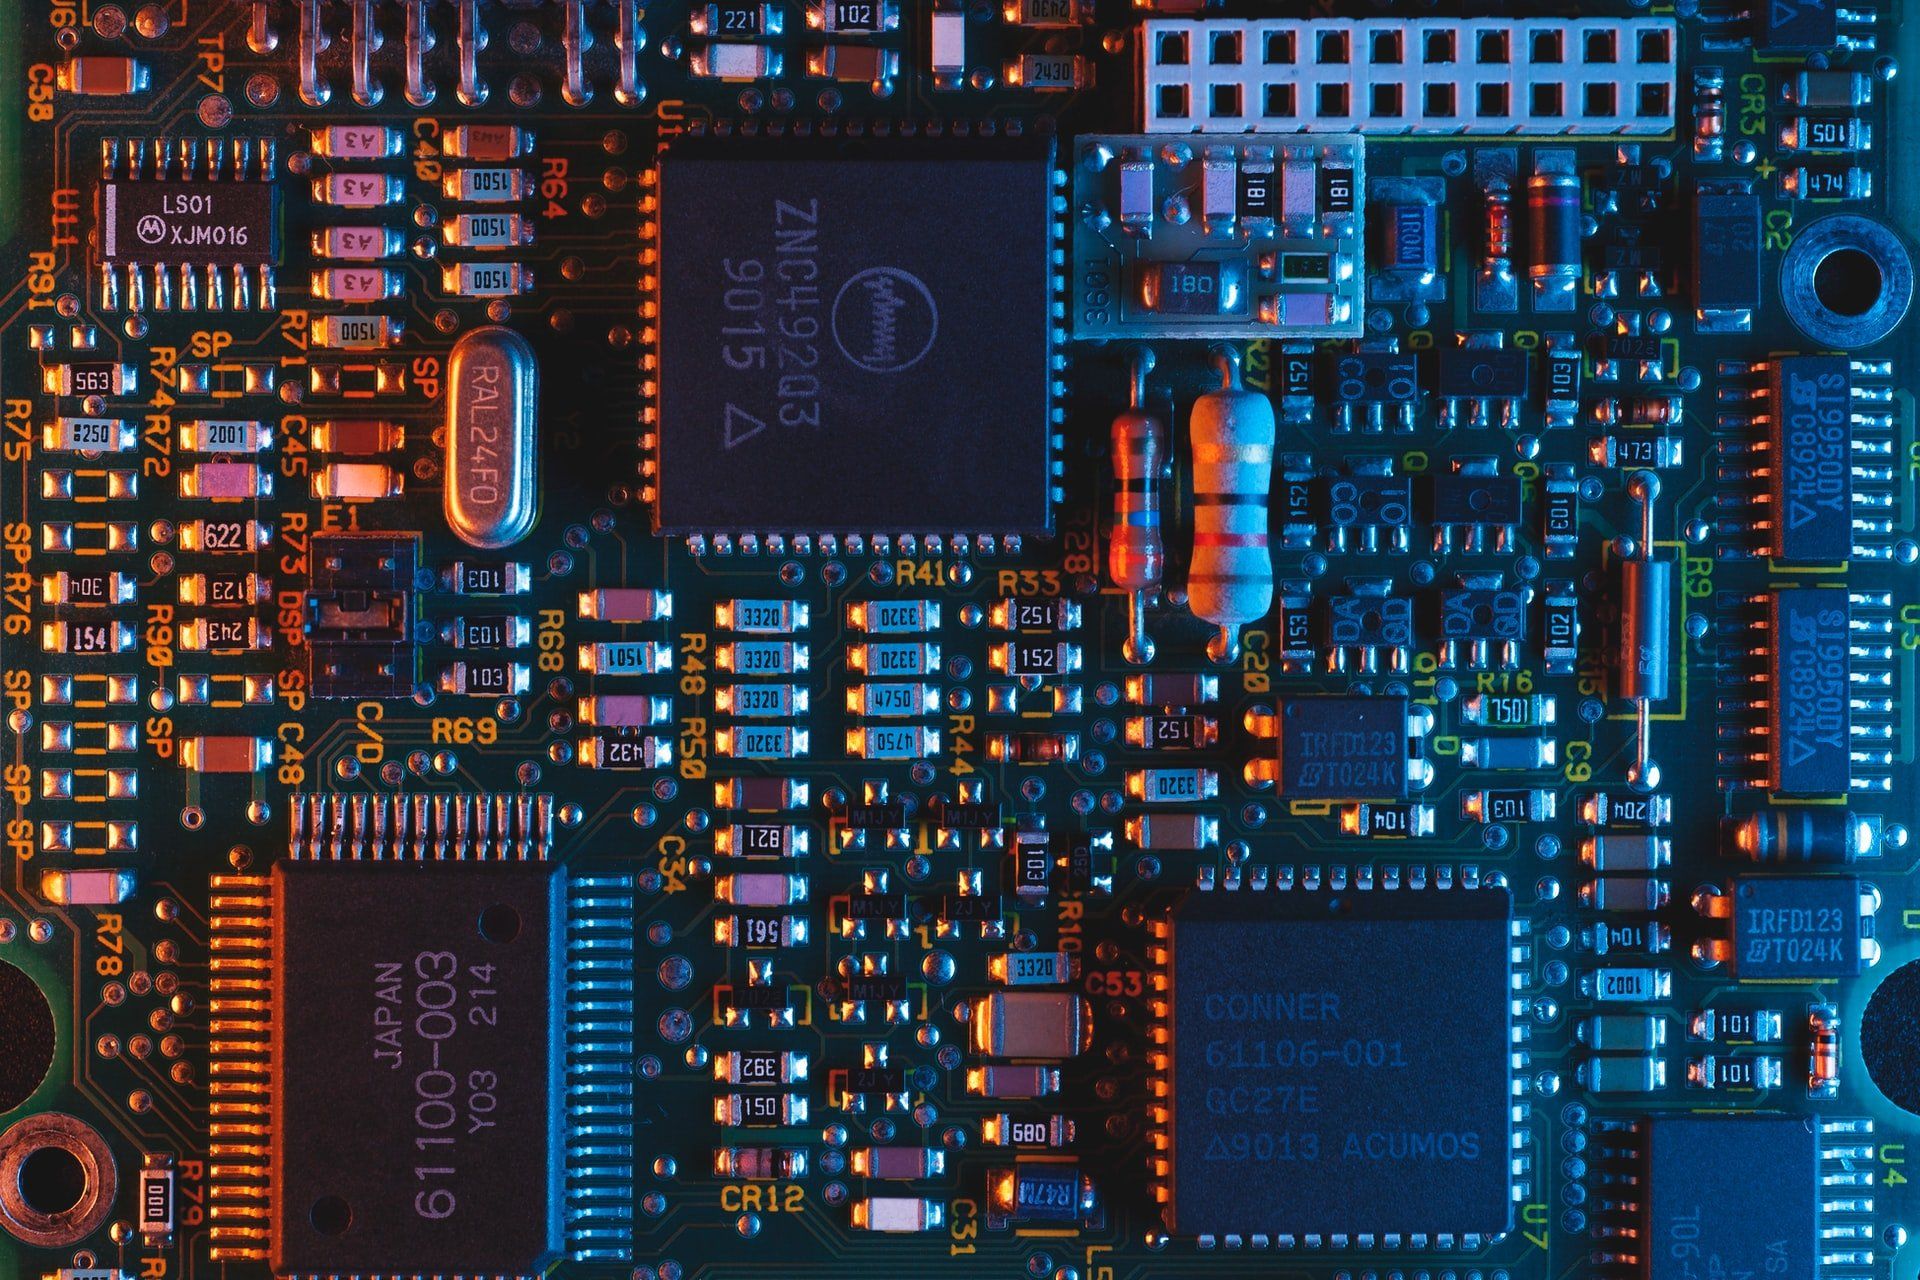 Image of the inside of a computer